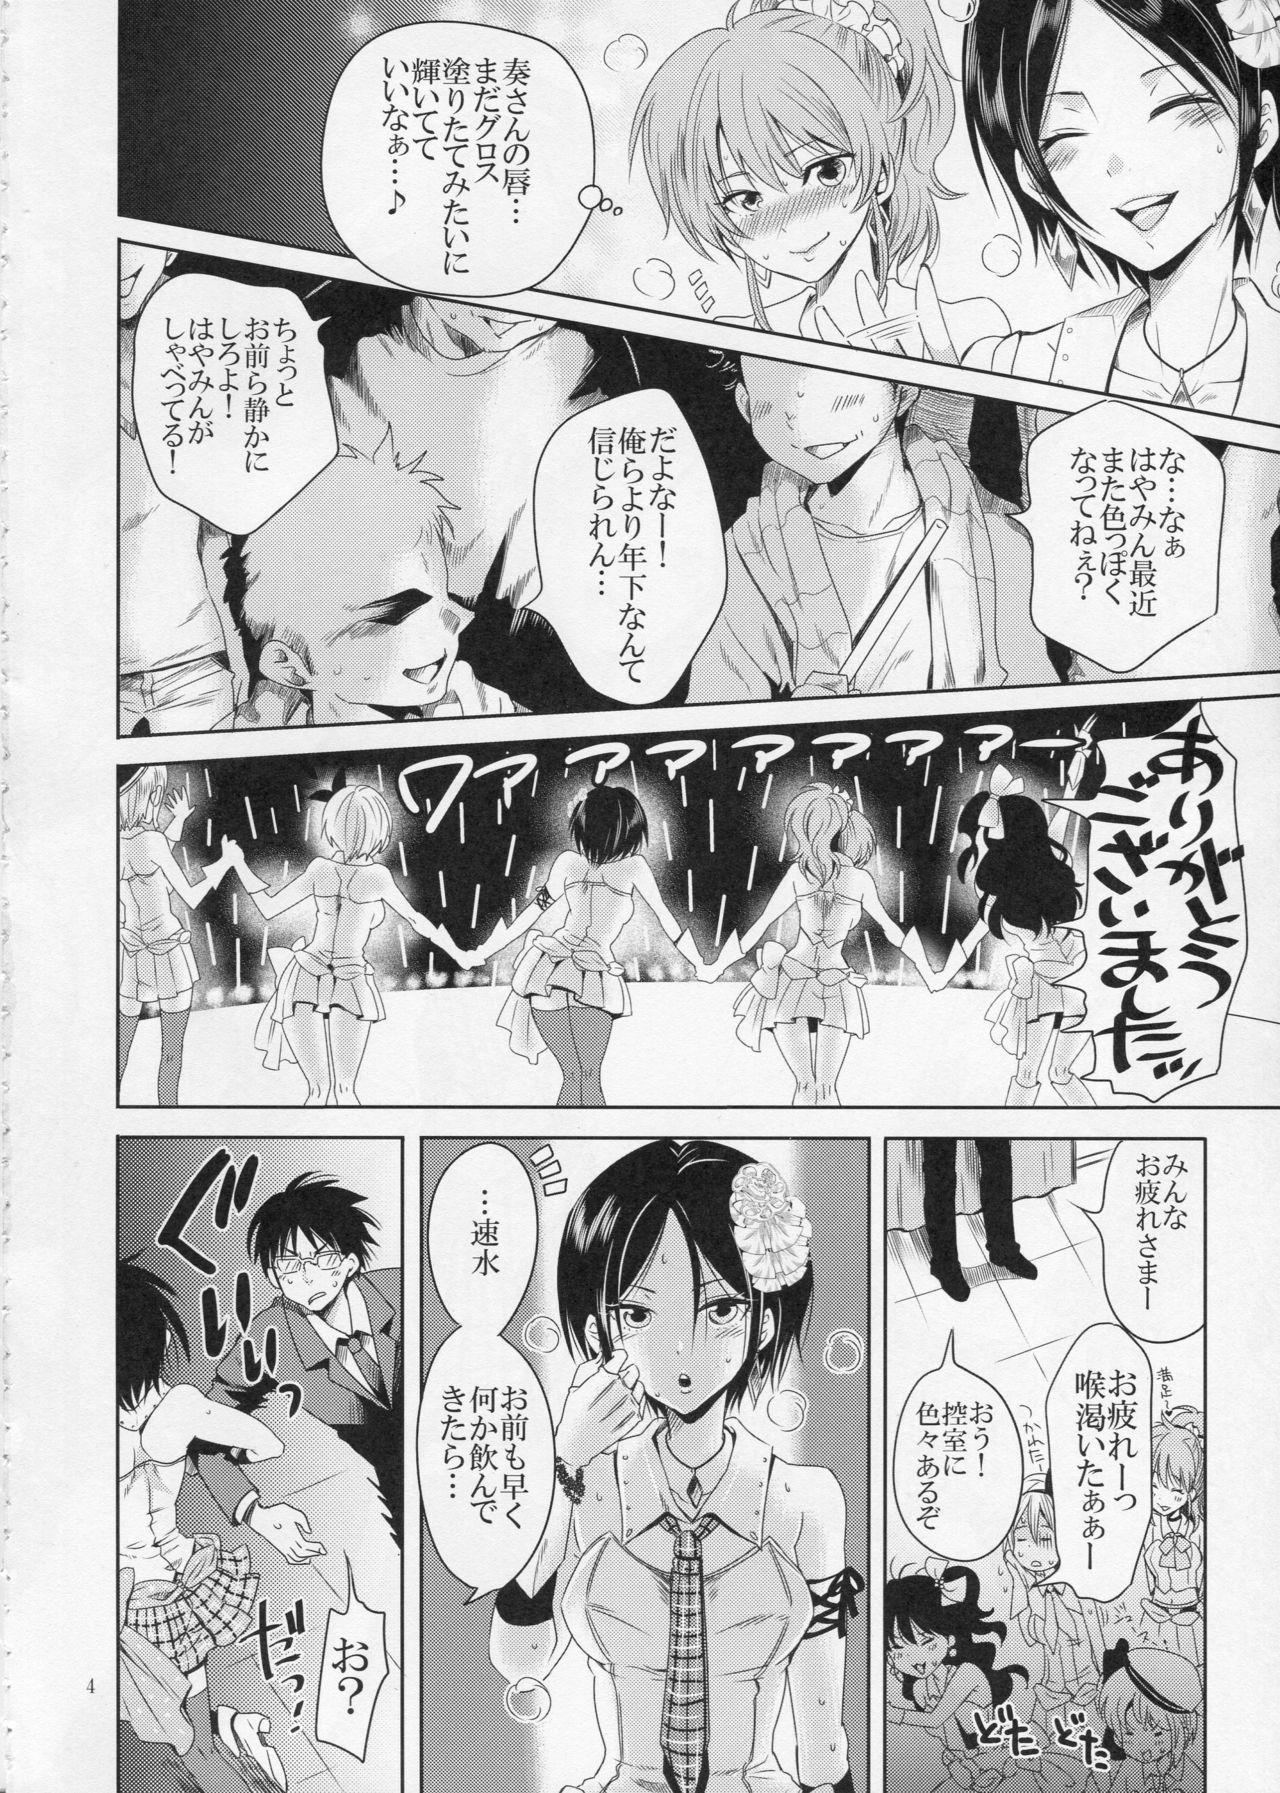 Toying Deep Kiss Junky - The idolmaster Yanks Featured - Page 3